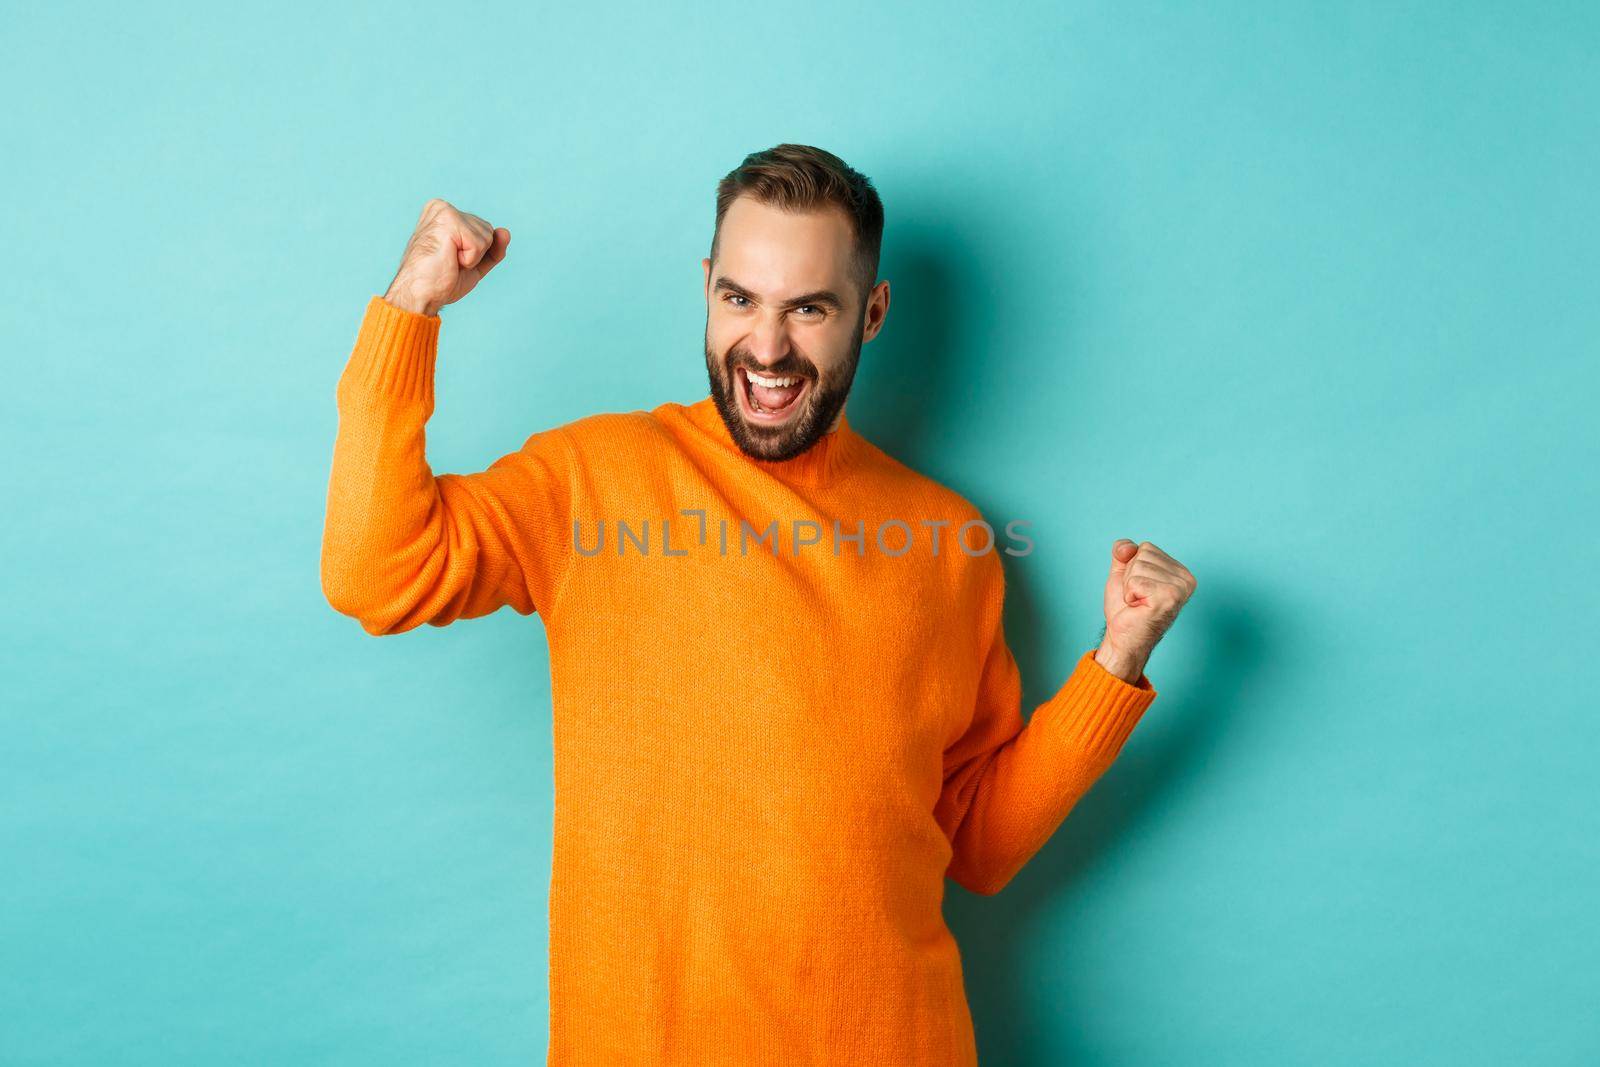 Winner. Excited man triumphing, making fist pump and saying yes, triumphing and looking satisfied, achieve goal, standing over light blue background.